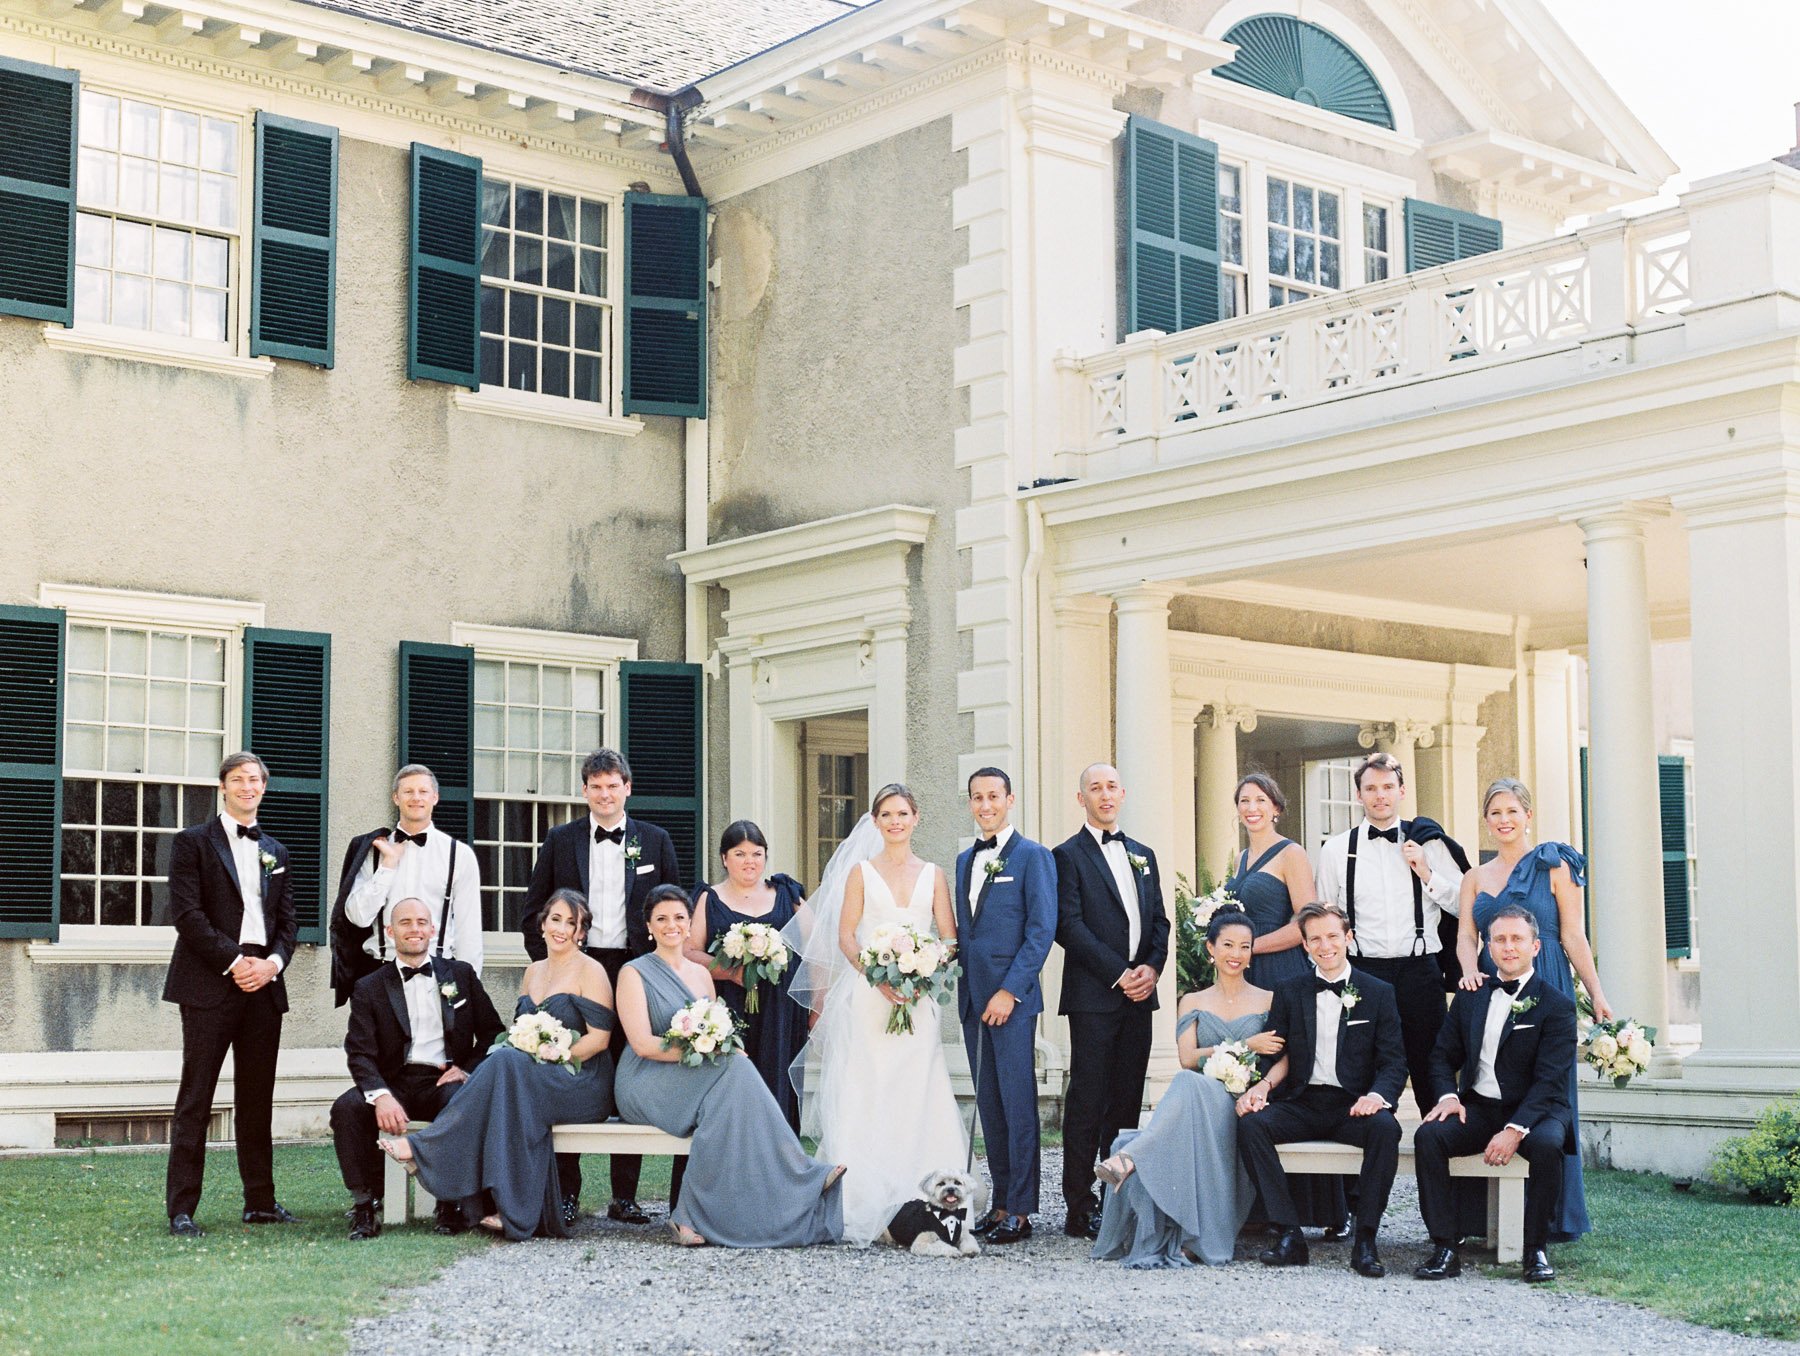 Bridal Party Vanity Fair Style Photography